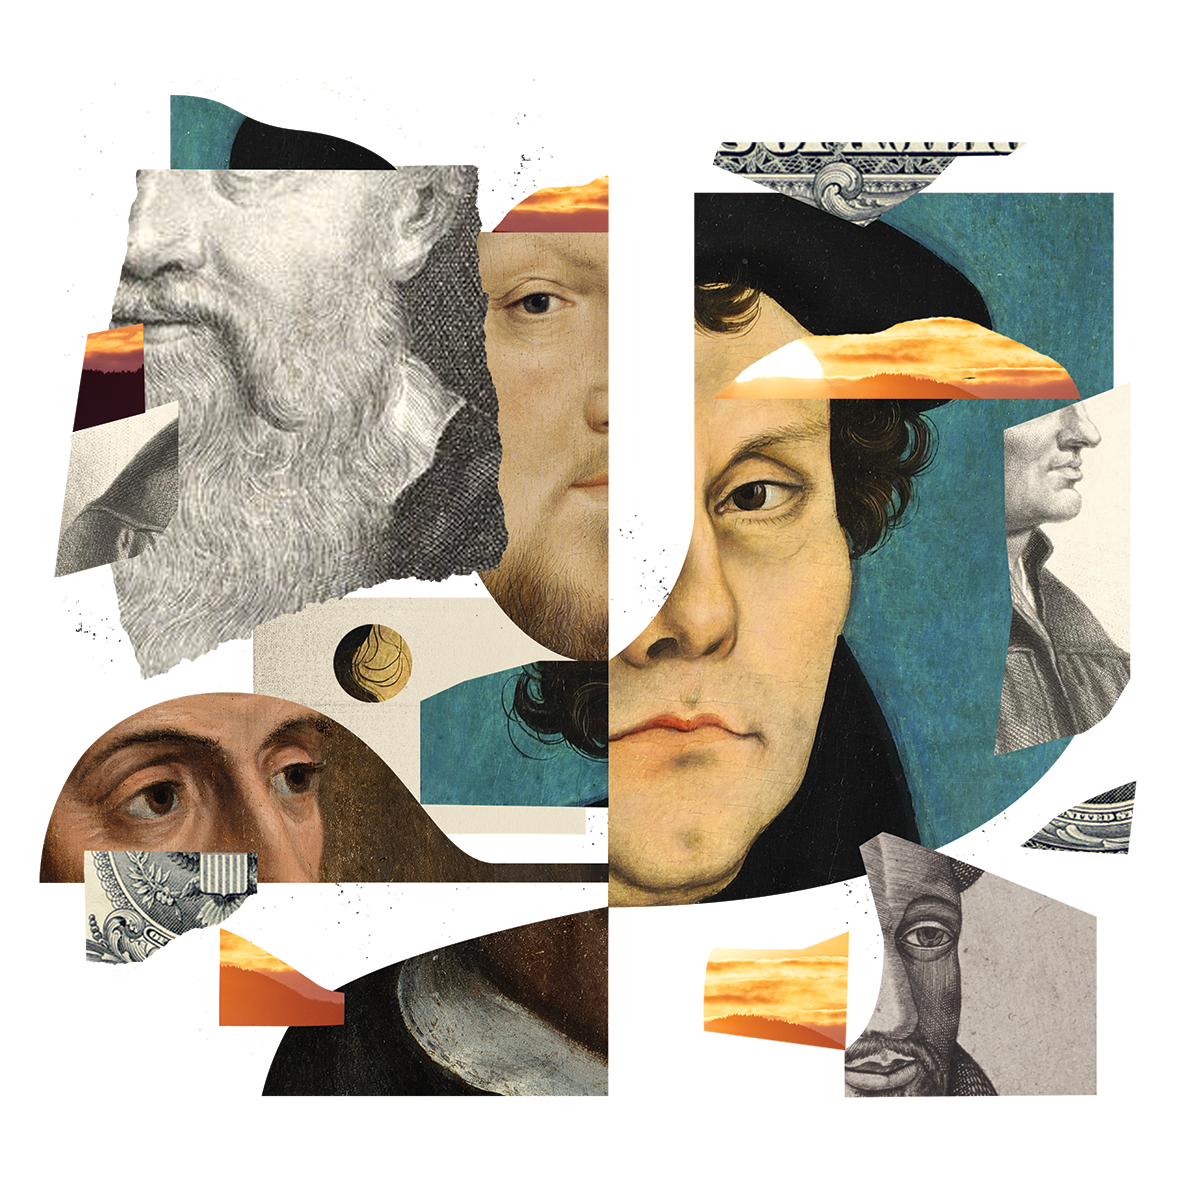 A collage of images of the Protestant Reformers